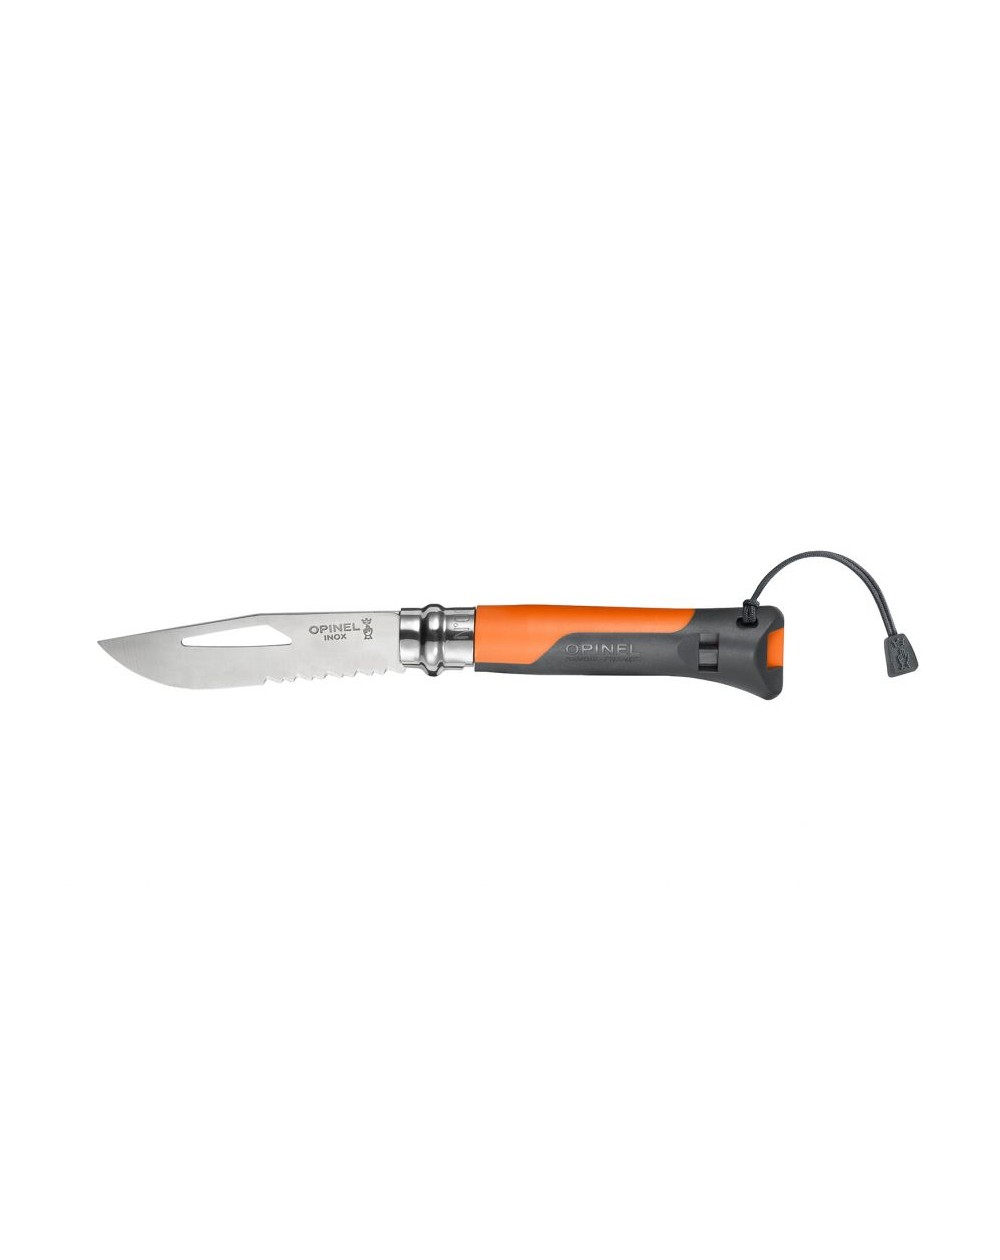 Couteau opinel n°8 outdoor manche orange